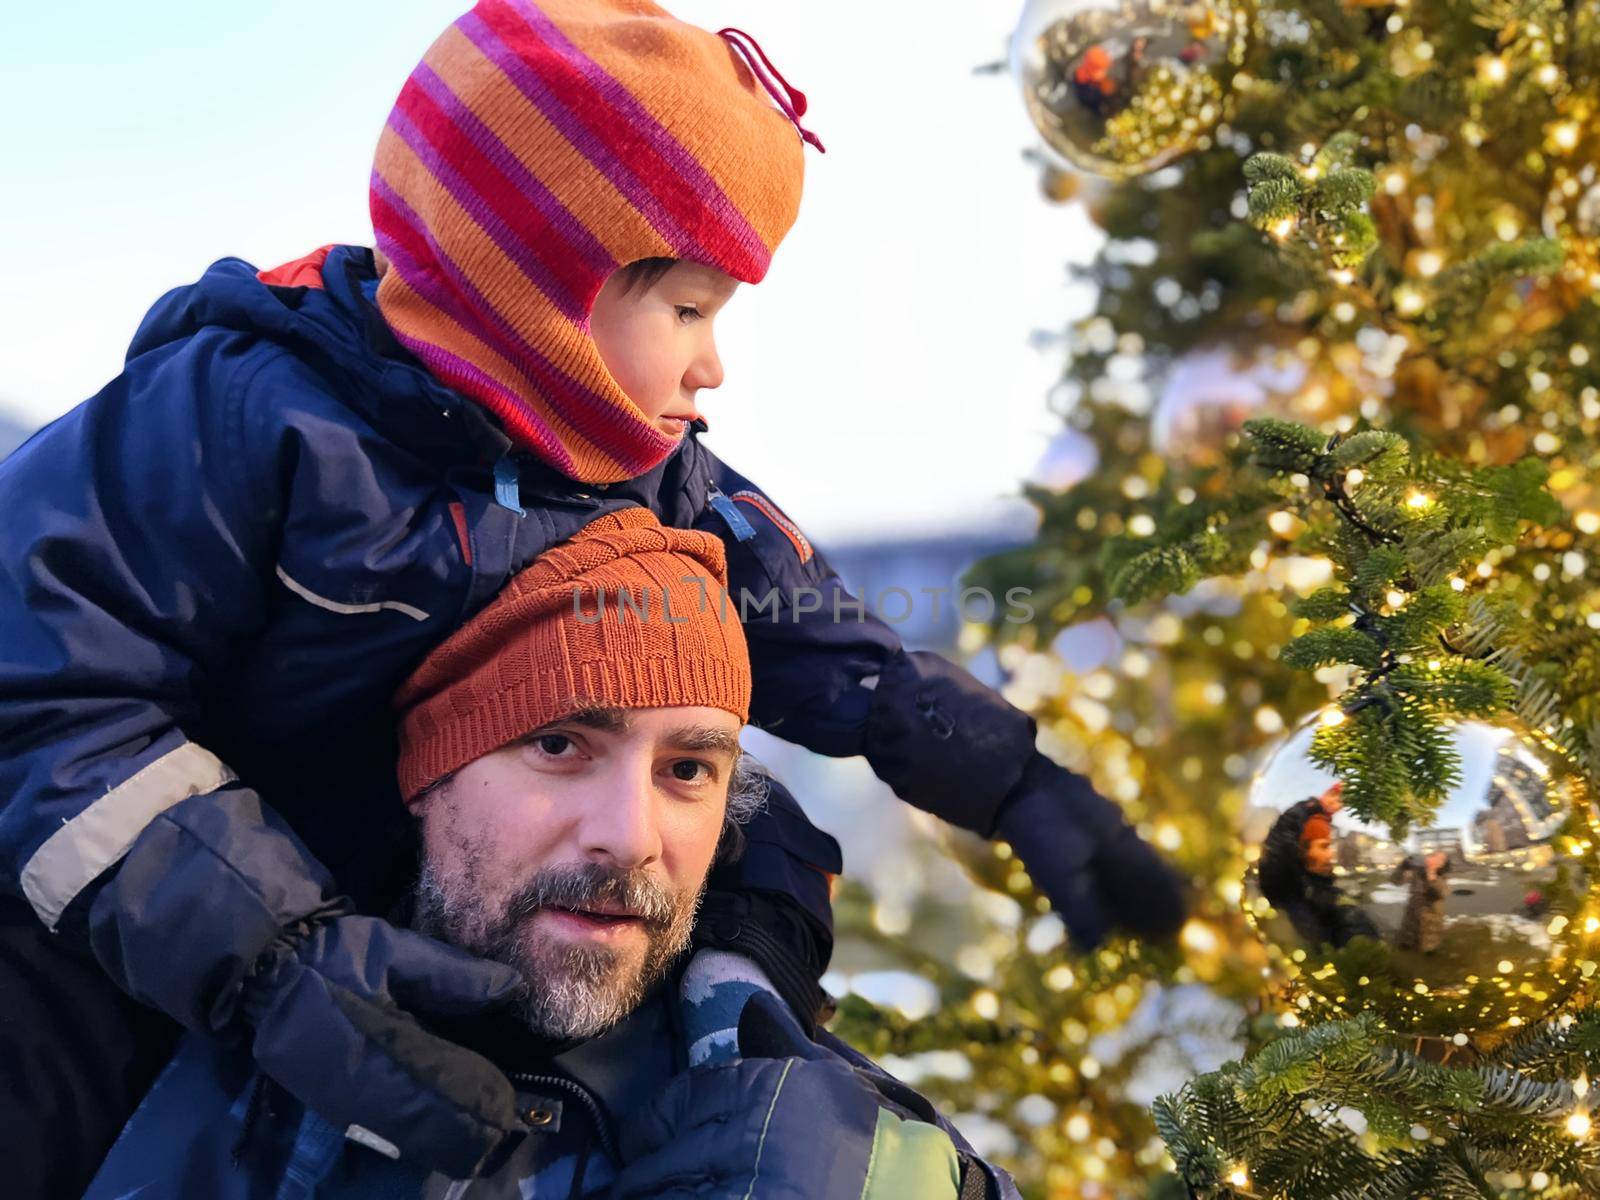 Father and son wearing winter hats spend time together at the Christmas tree